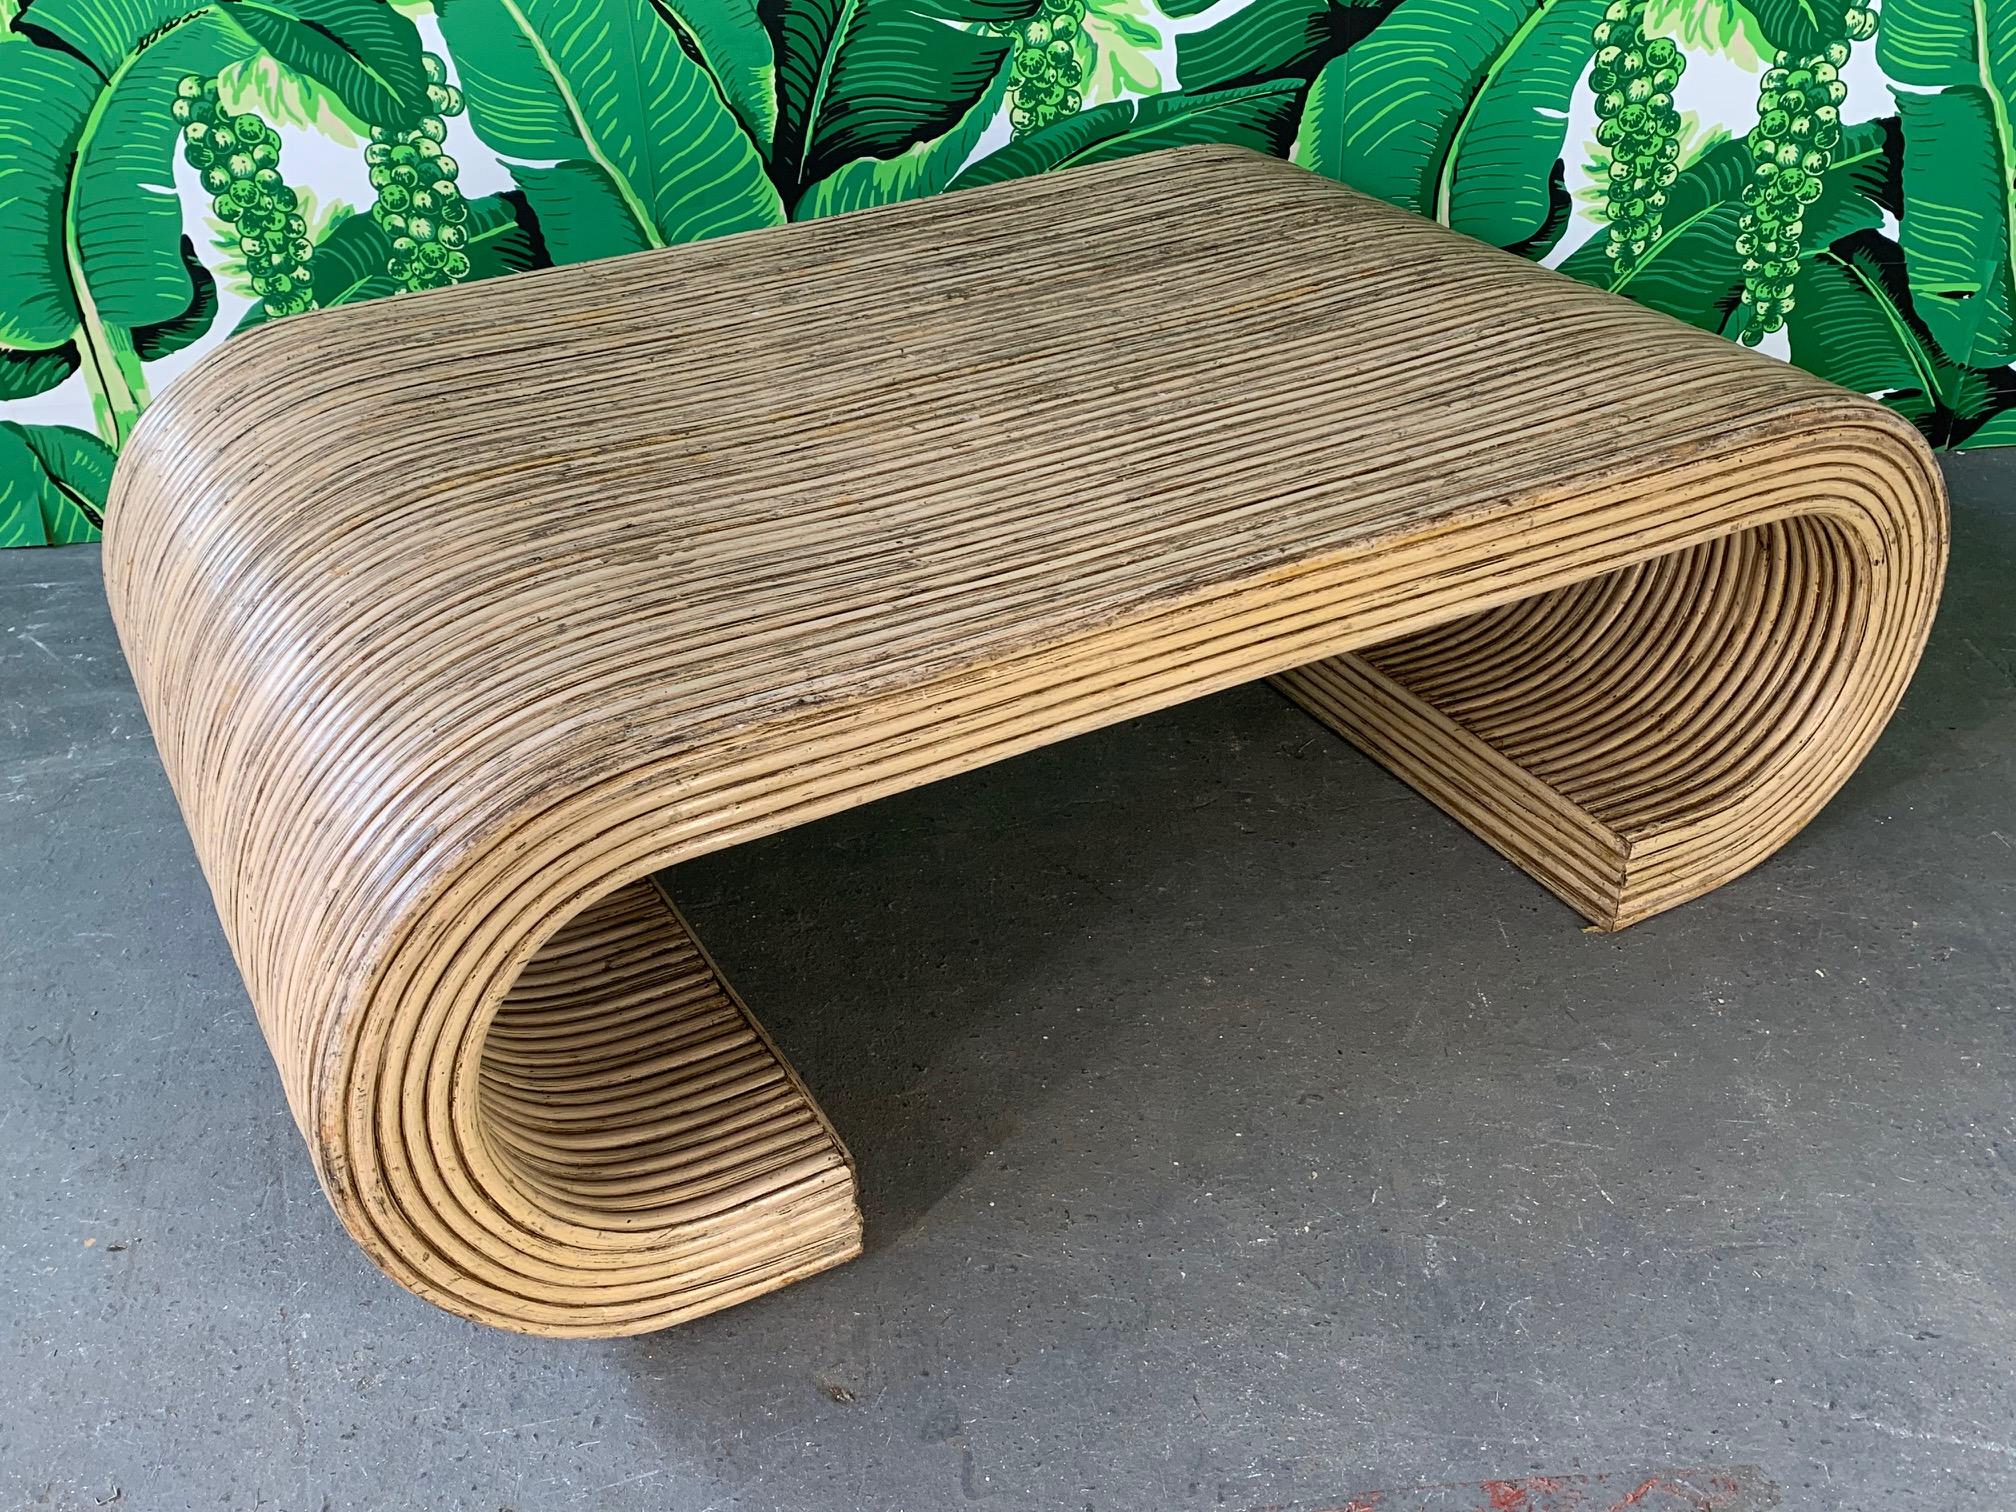 Scroll shaped coffee table features full rattan wrapping and sculptural form. Split reed wrap. Good condition with minor abrasions consistent with age.